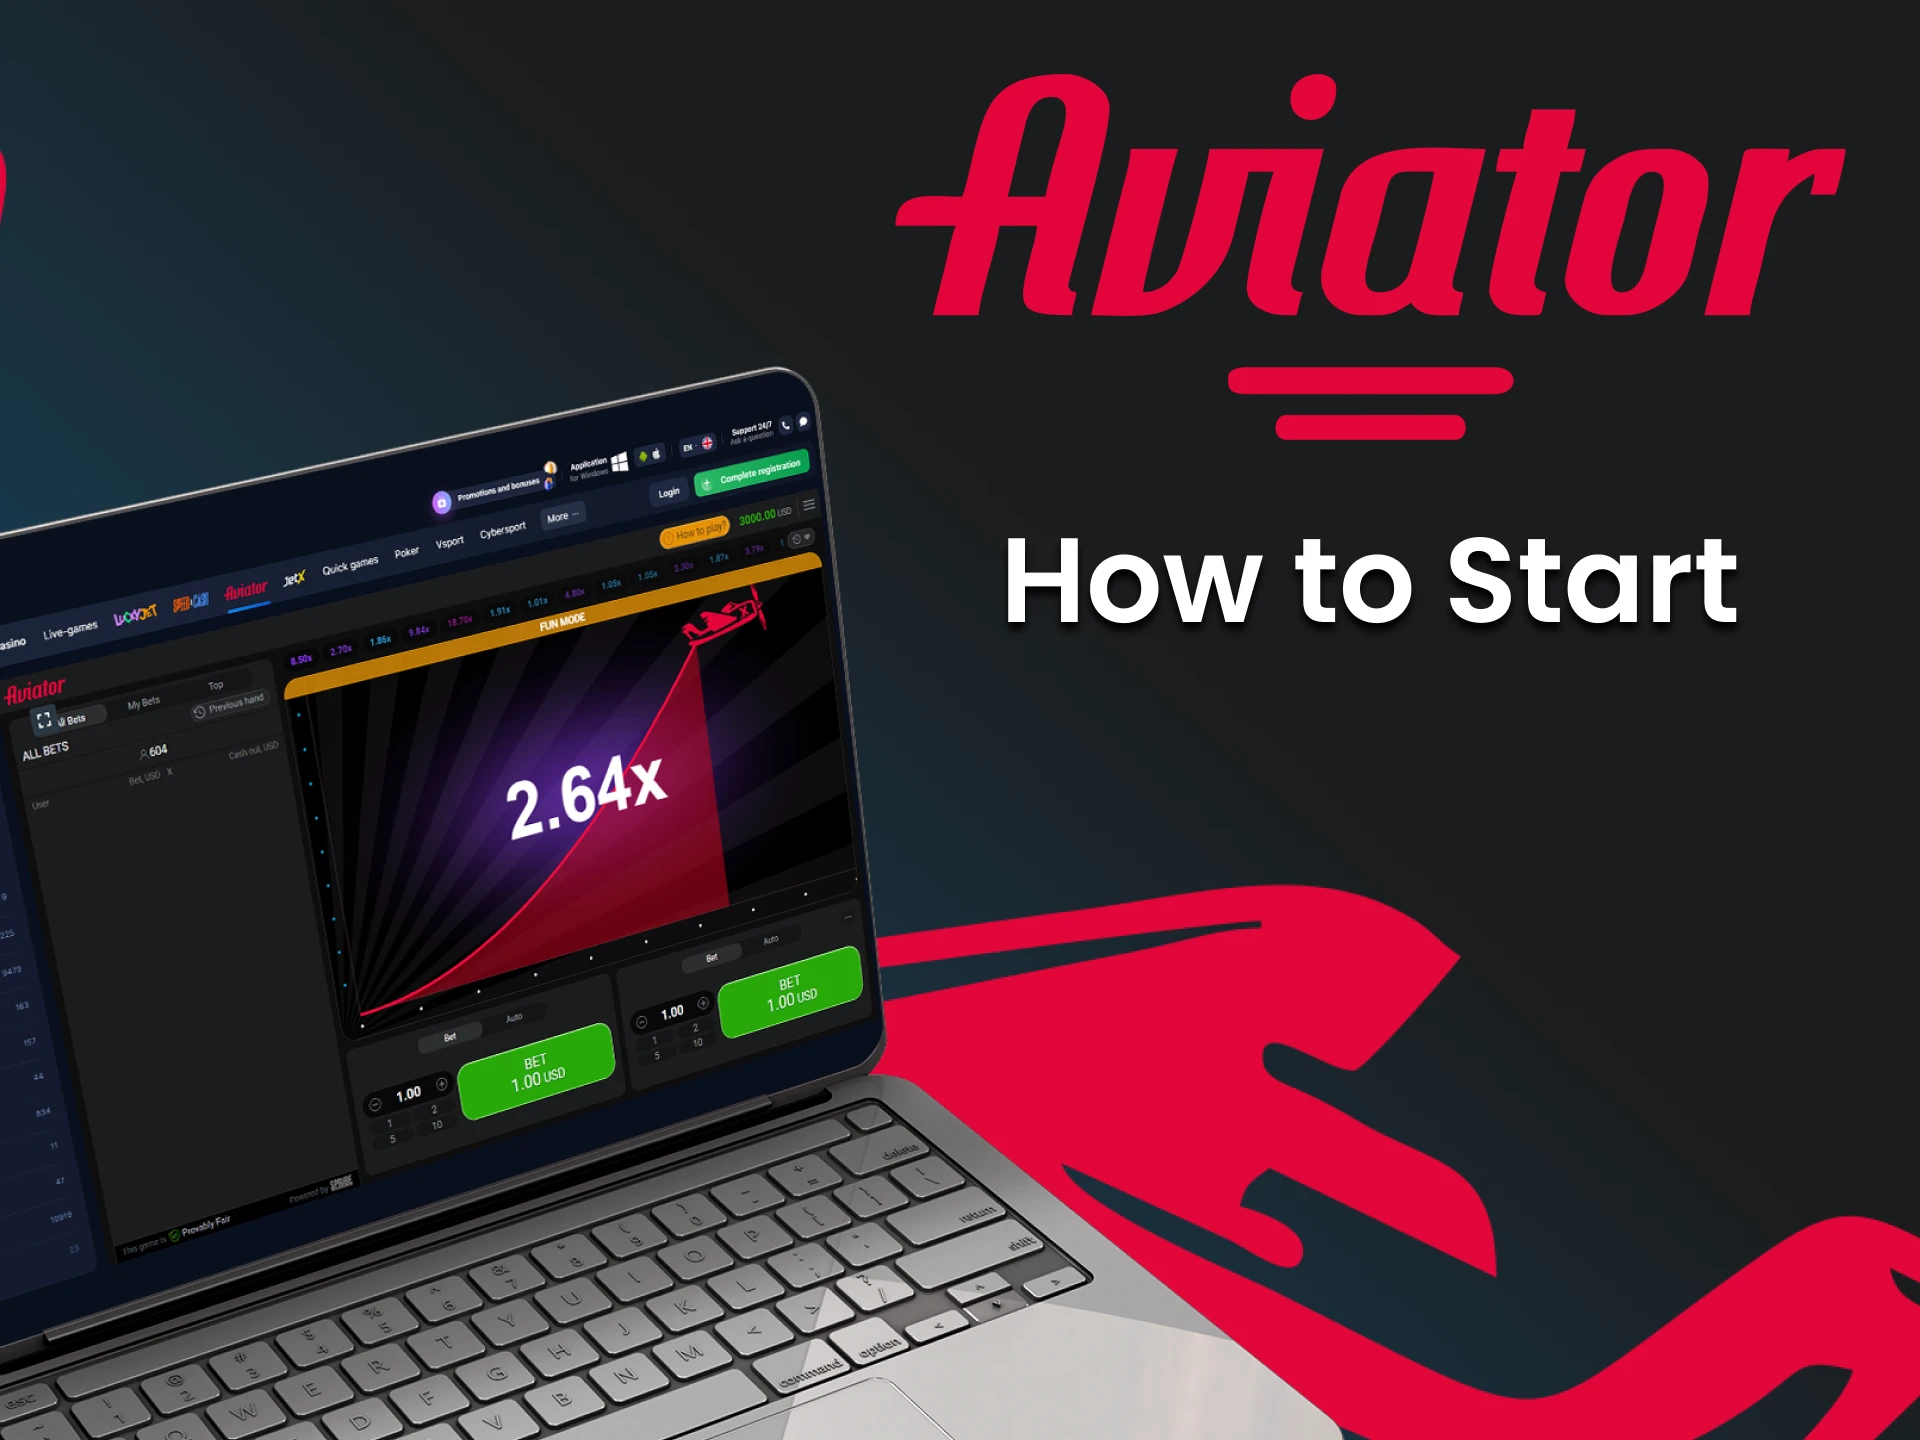 Go to the desired section to start playing Aviator.